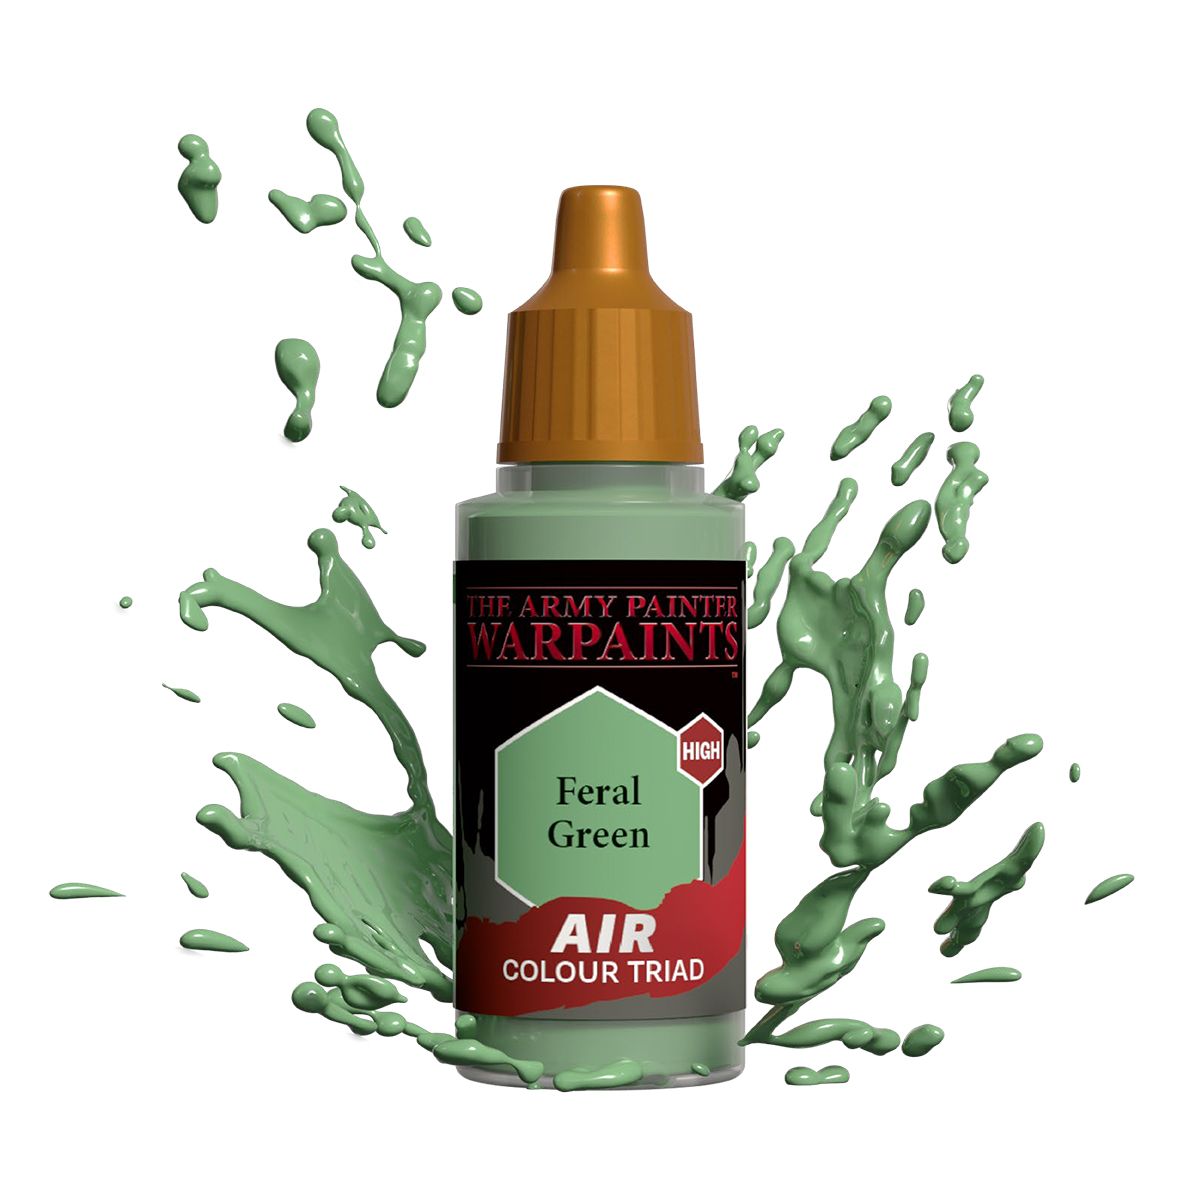 Army Painter Warpaint Air - Feral Green (18ml) - Loaded Dice